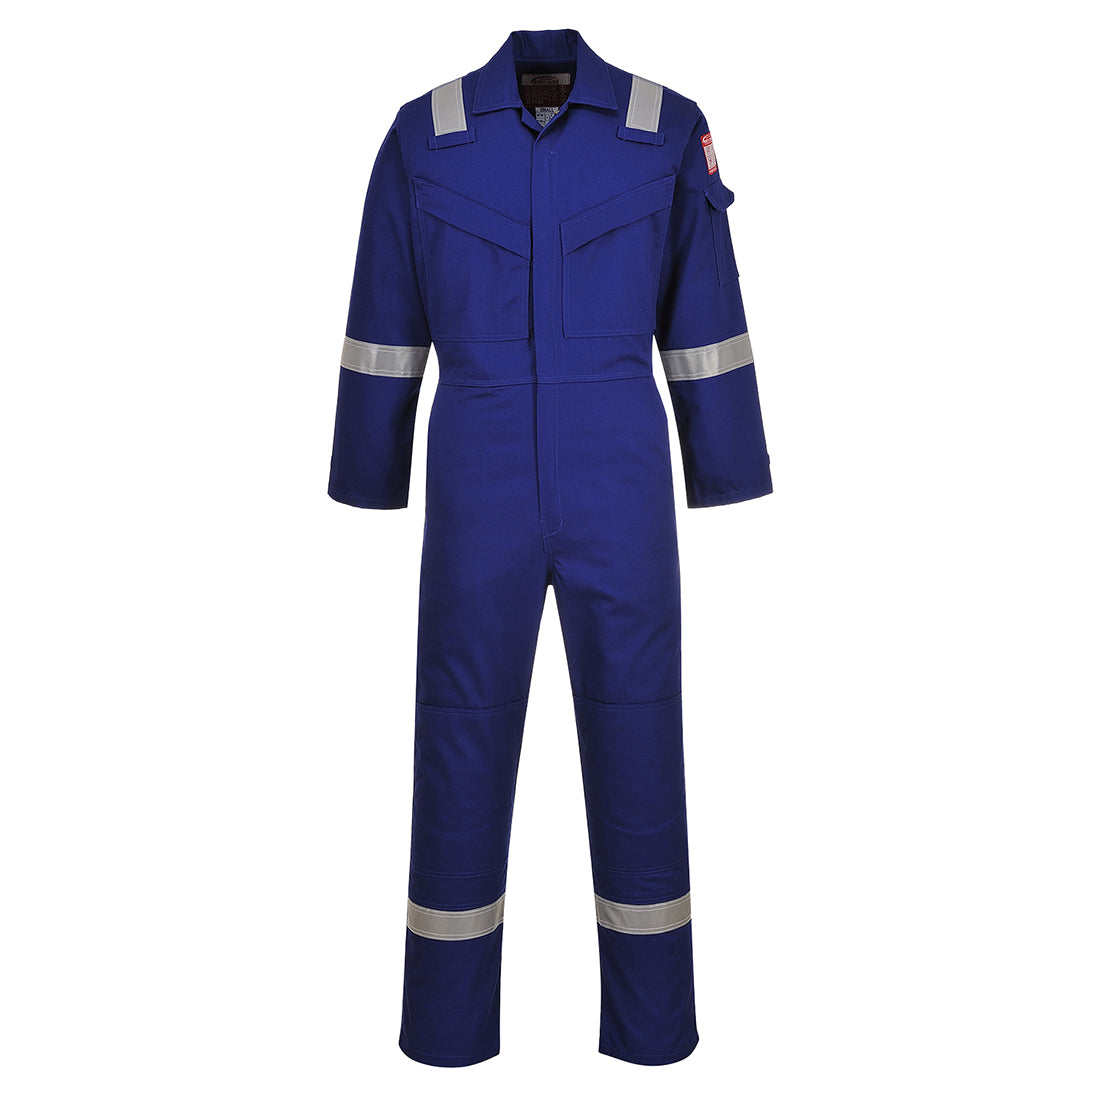 Portwest FR50 Royal Sz S Clearance Flame Resistant Anti-Static Boiler Suit Coverall Overall